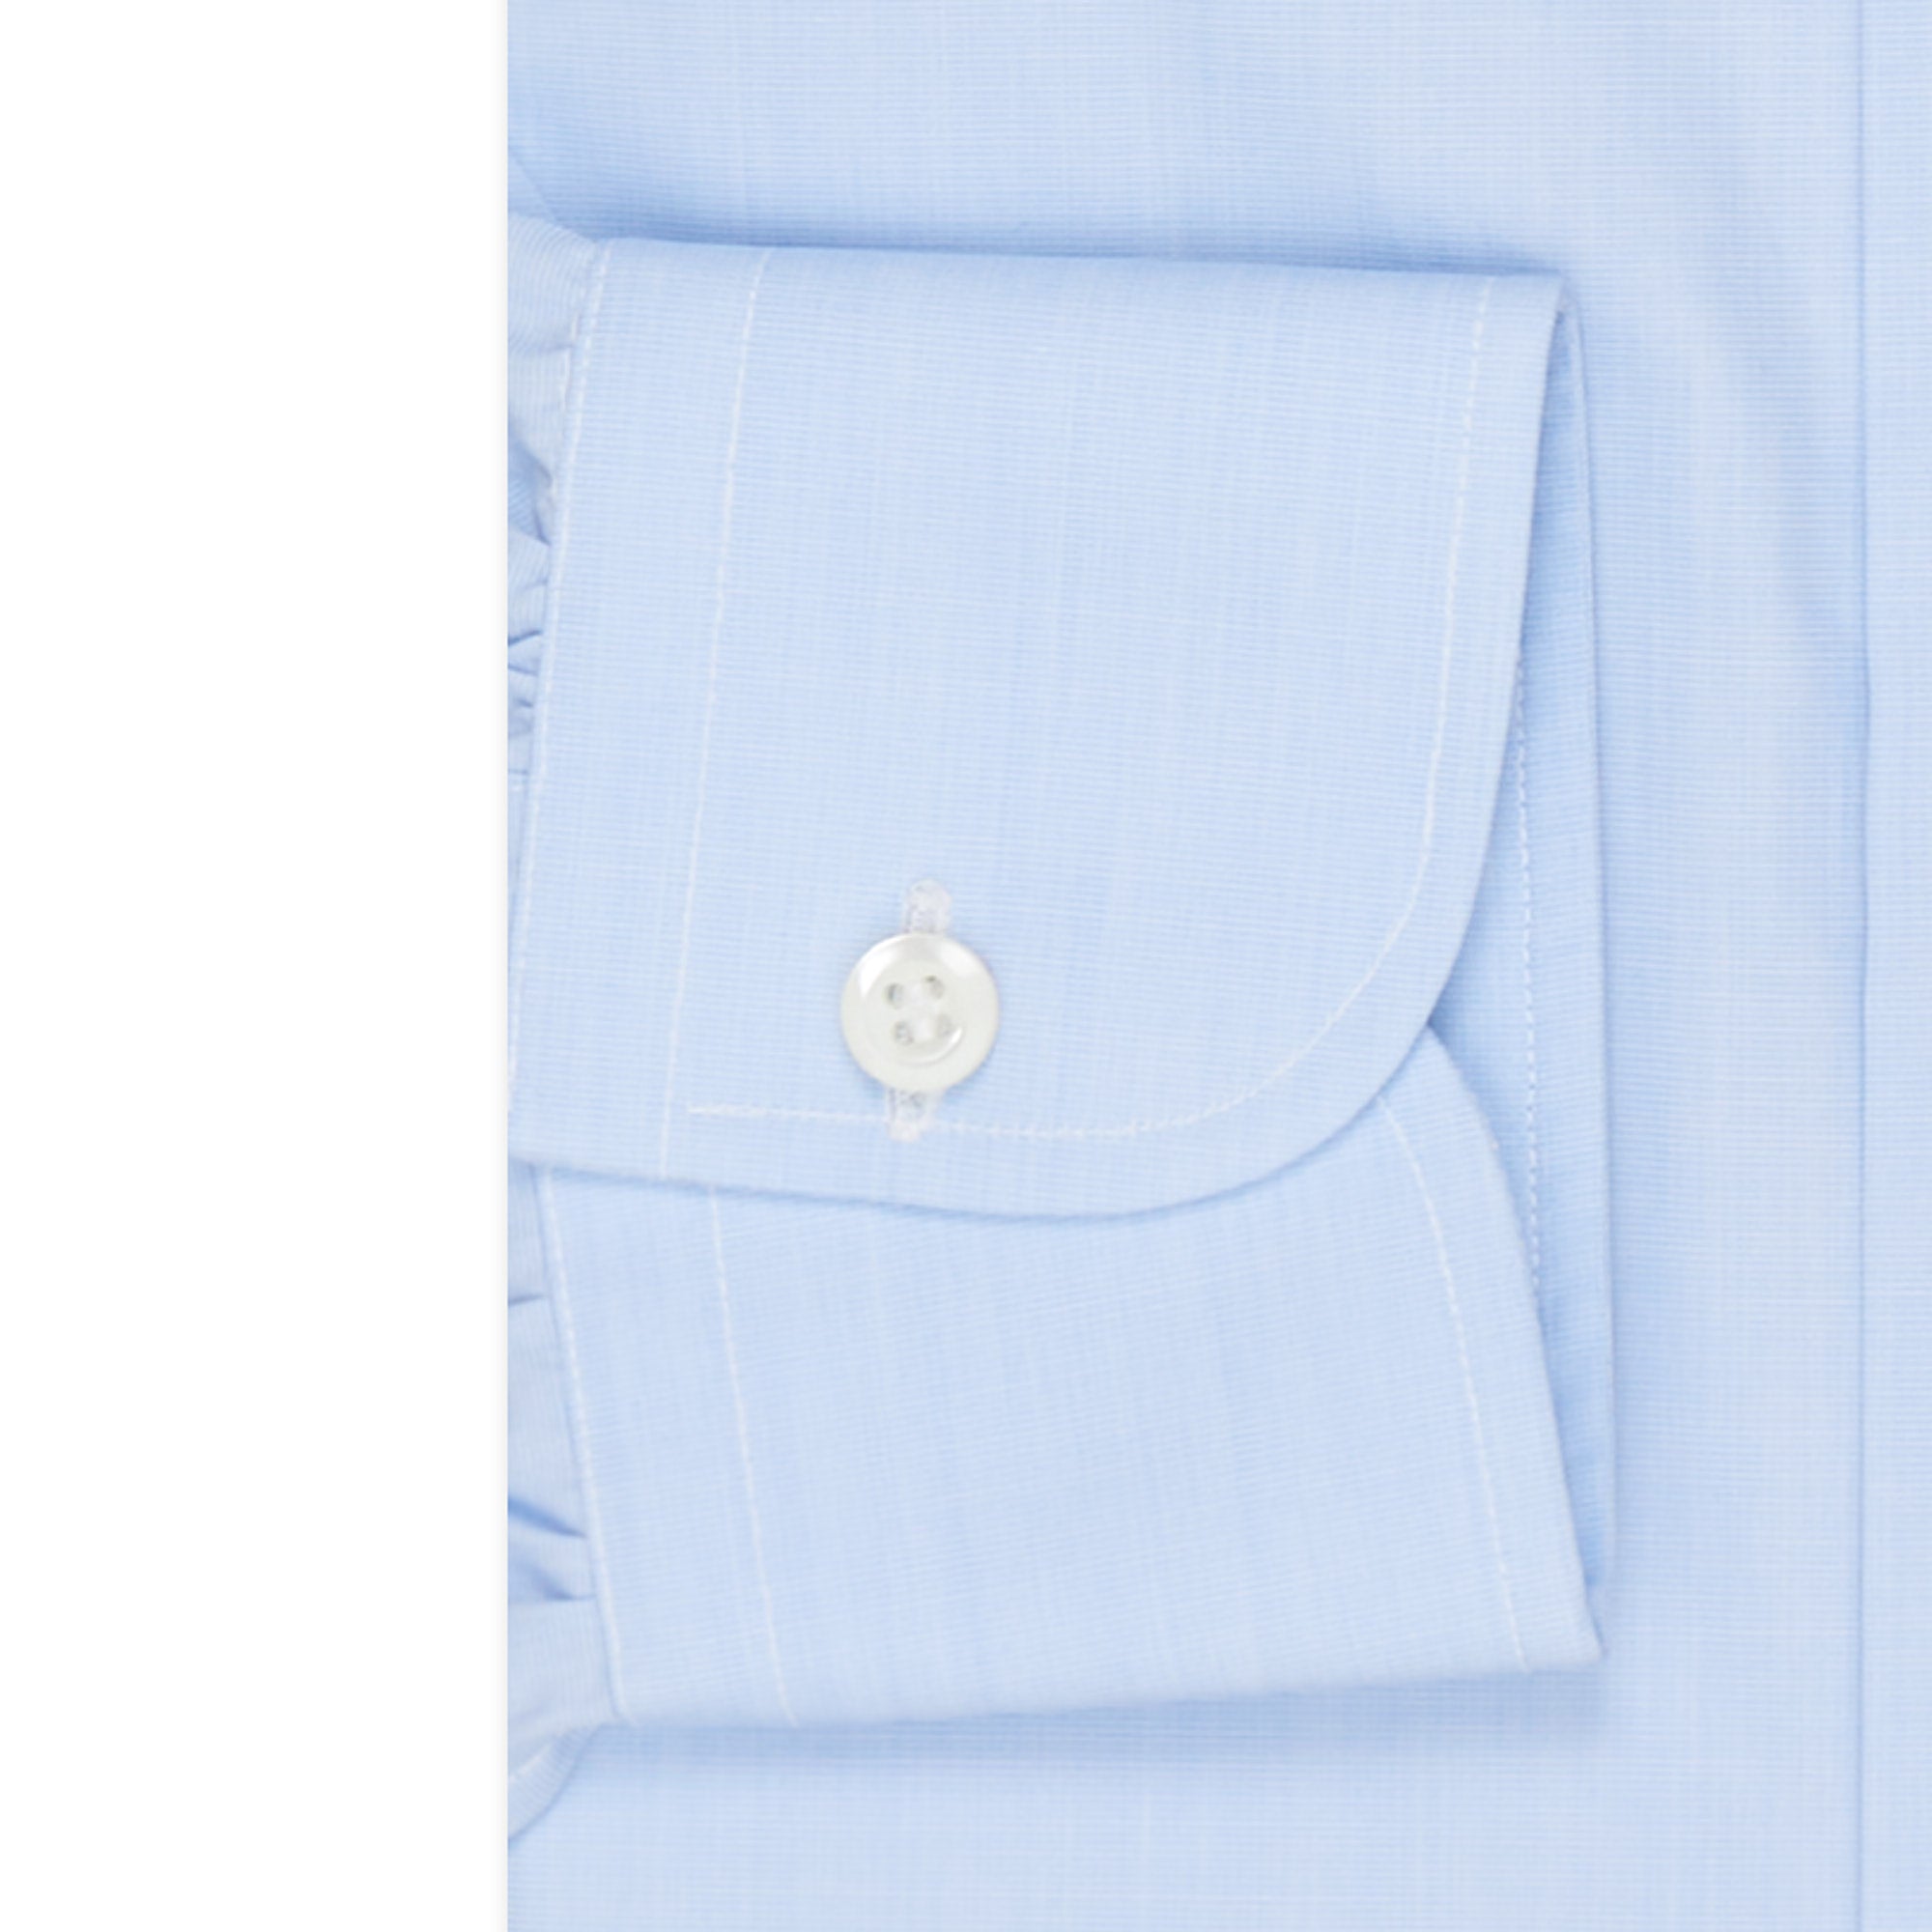 BESPOKE ATHENS Handmade Solid Blue End-on-End Cotton Dress Shirt NEW